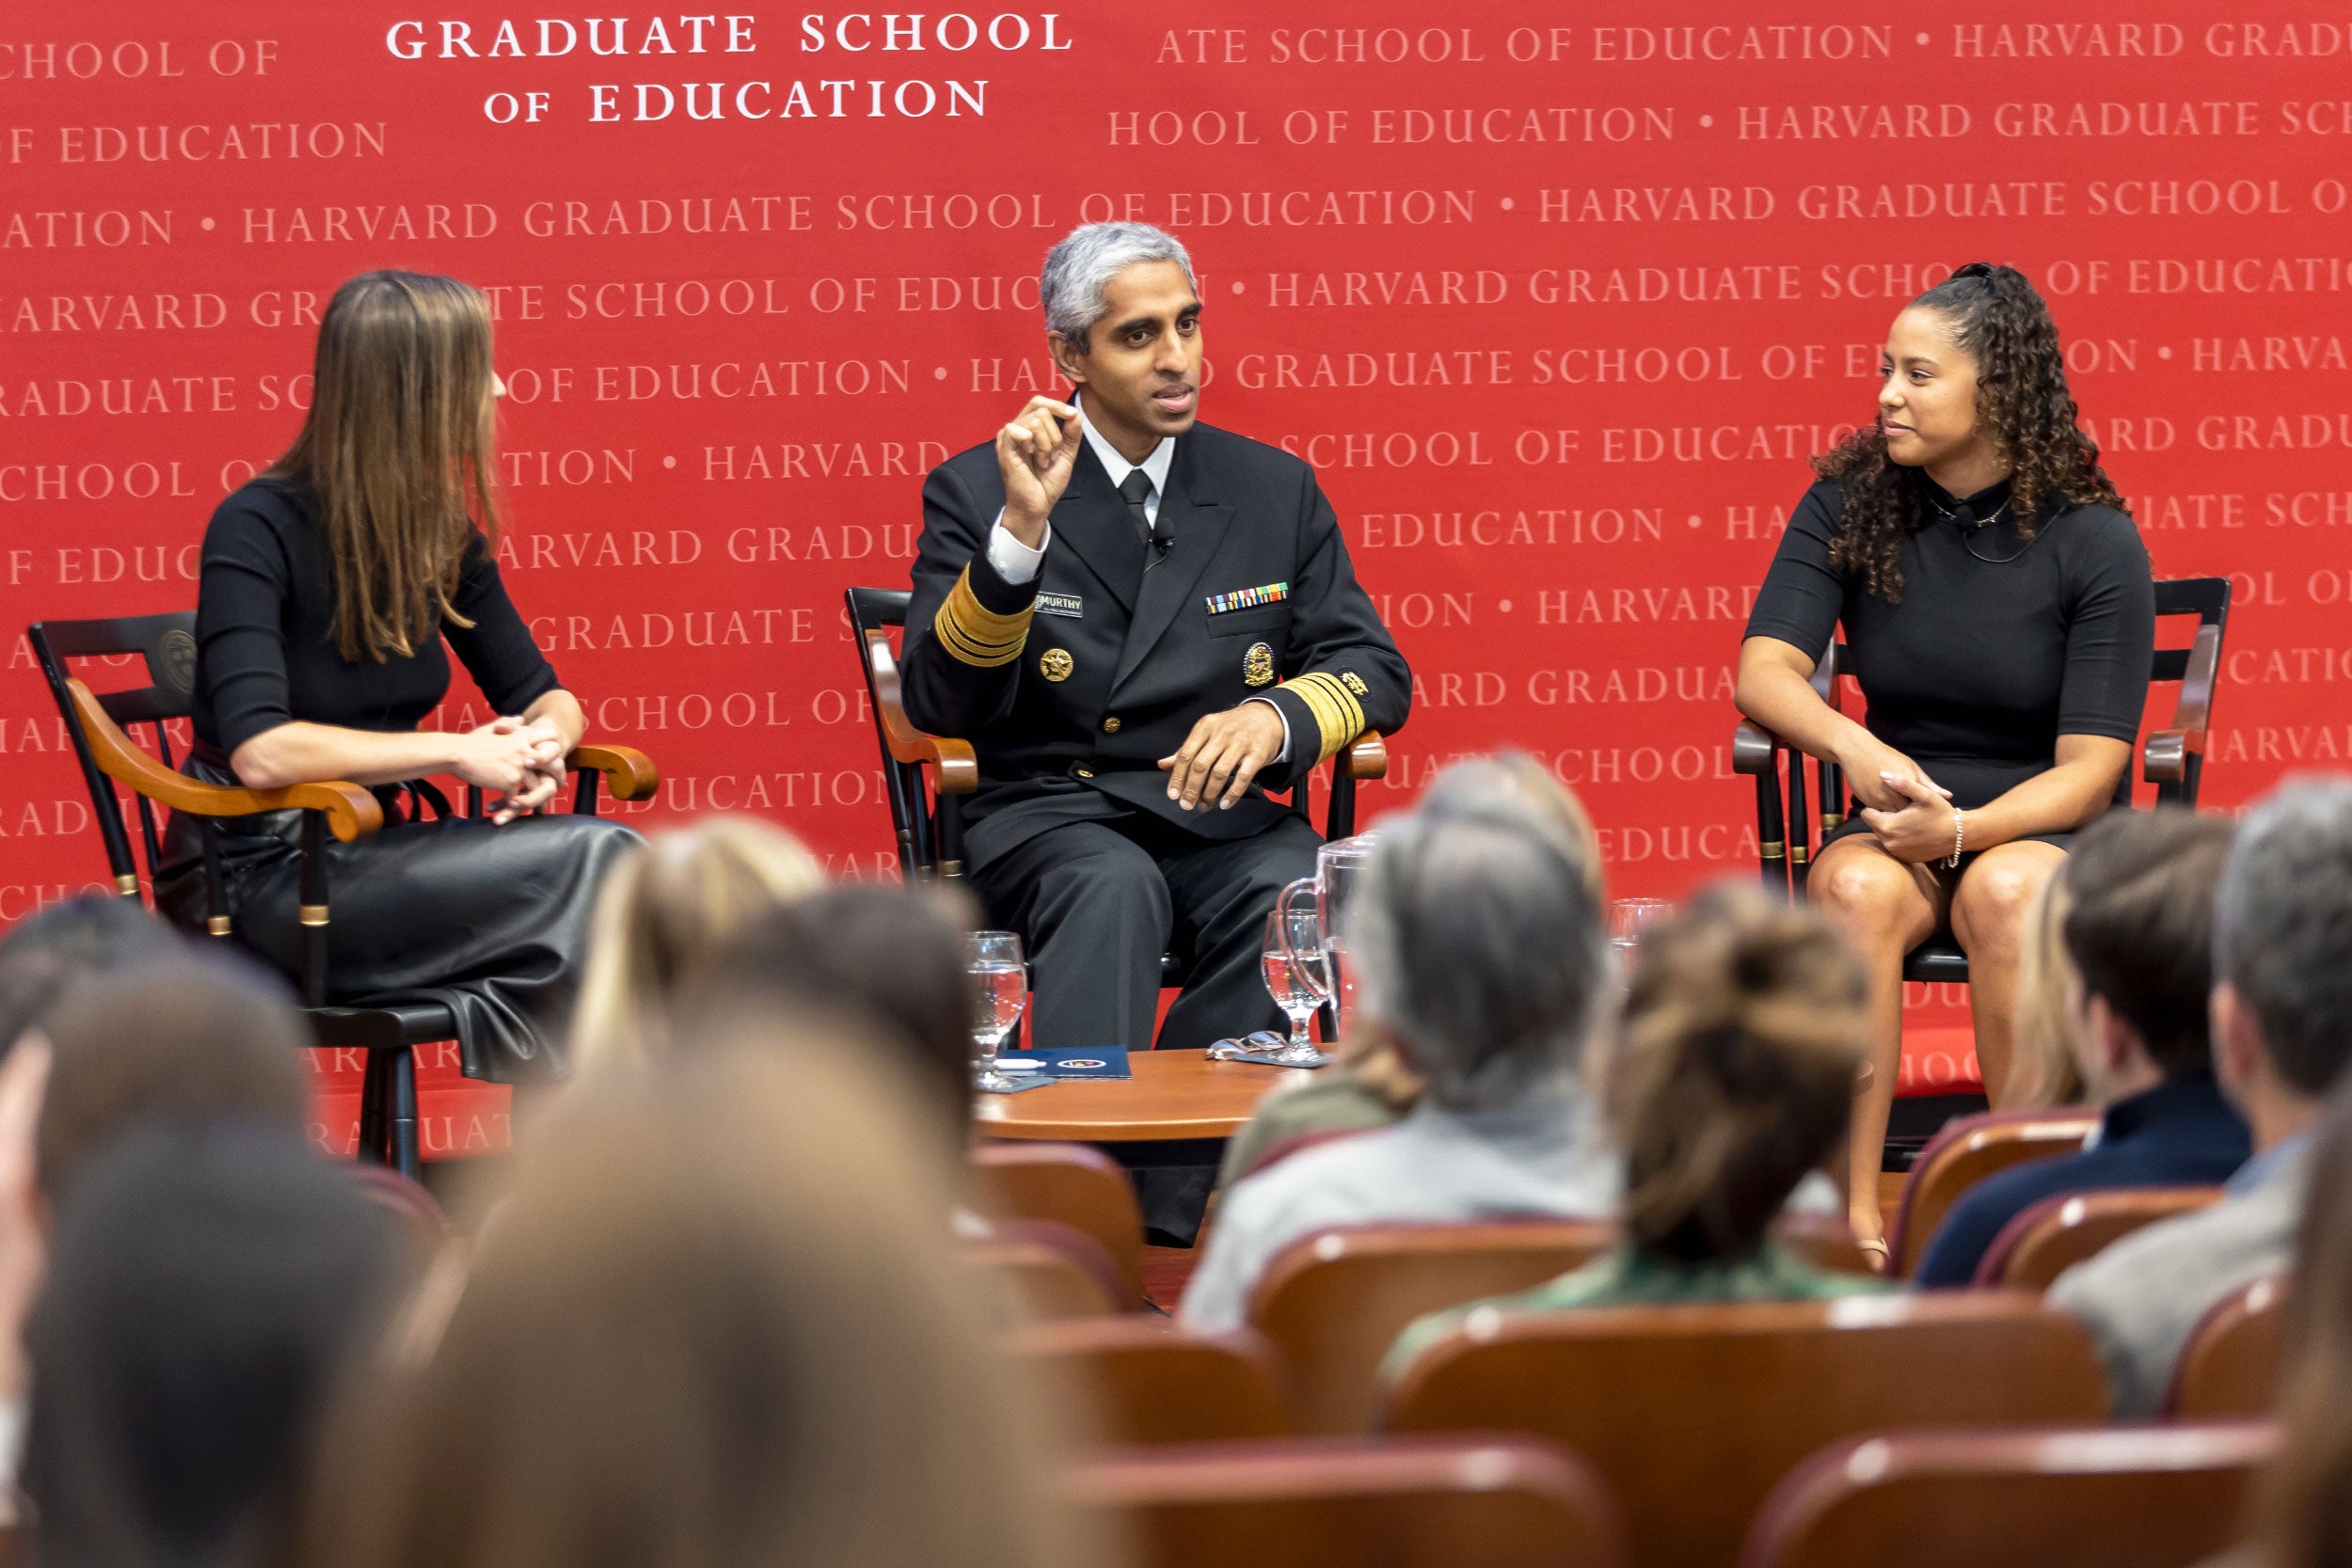 Emily Weinstein Vivek Murthy, U.S. Surgeon General and Destinee Ramos, Harvard College student Class of 2026 onstage at the Ed School.